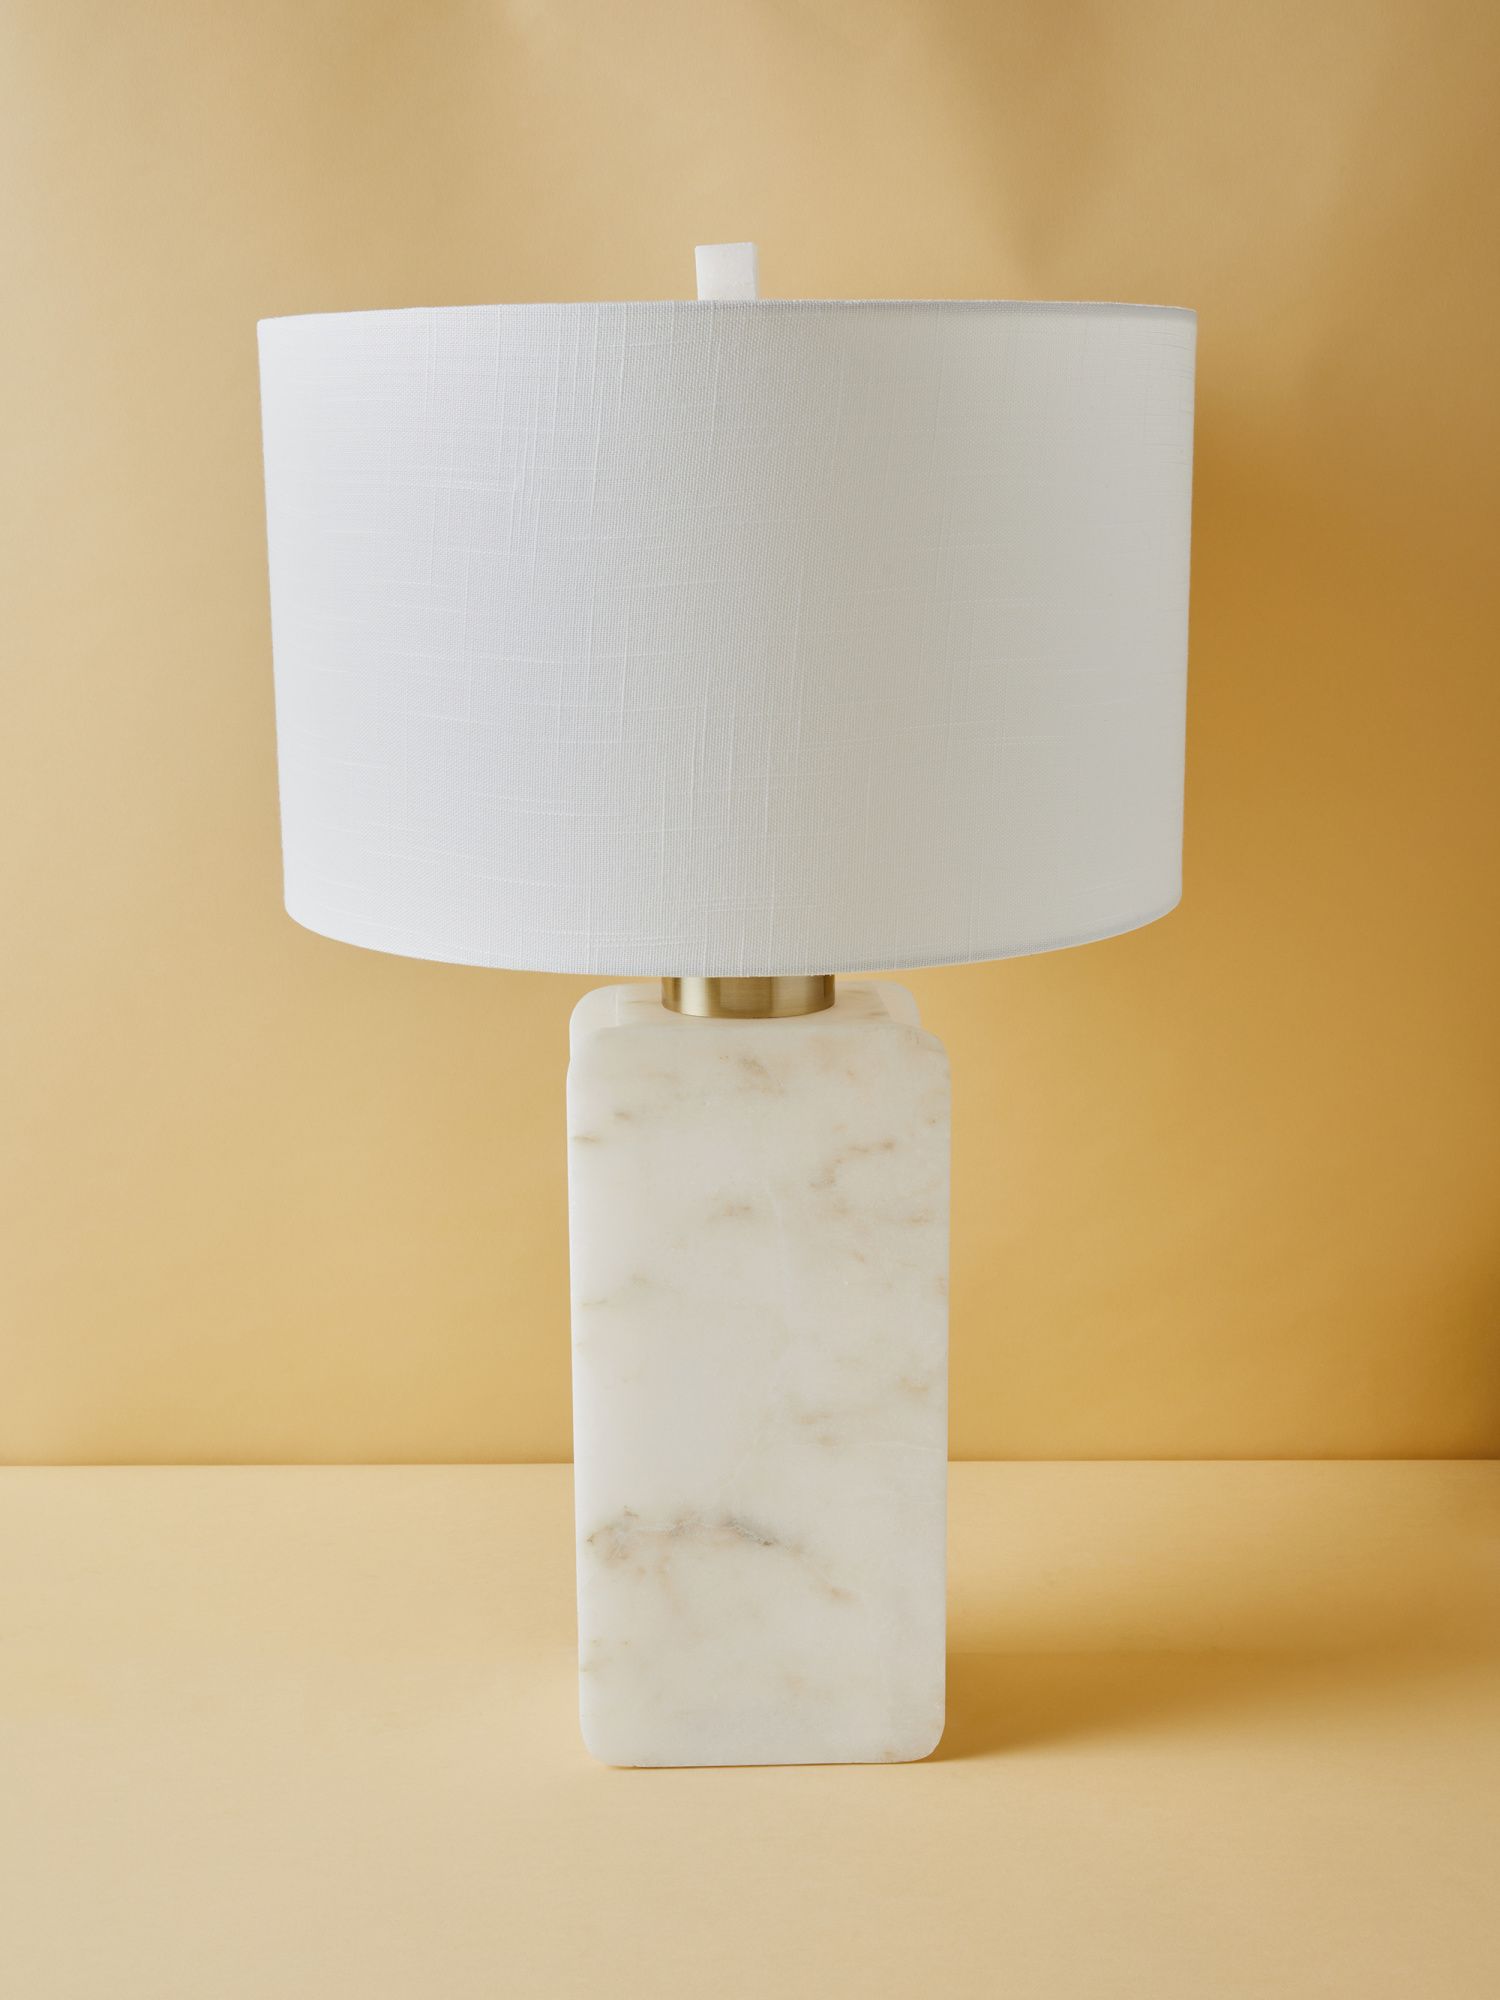 26in Travertine Marble Table Lamp | HomeGoods